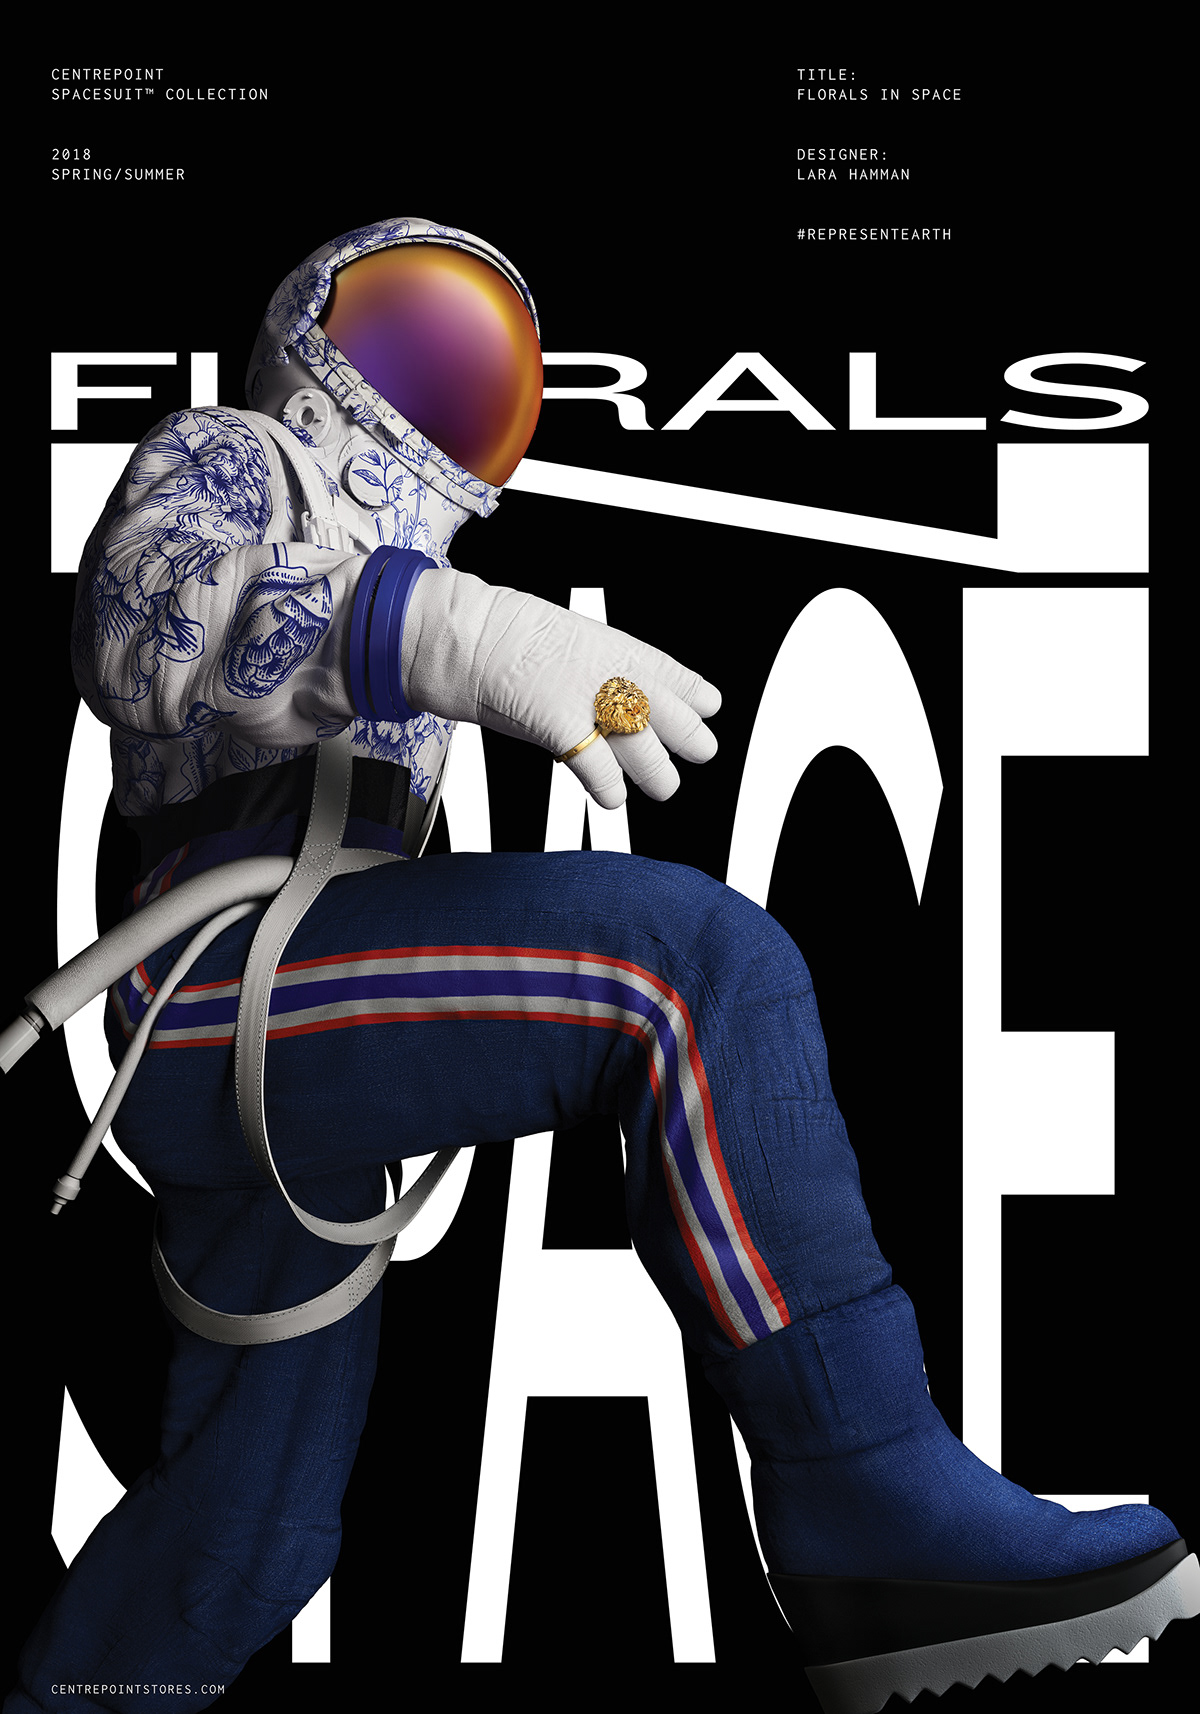 posters spacesuit Fashion  Collection typography   CGI magazine graphic design  3D motion